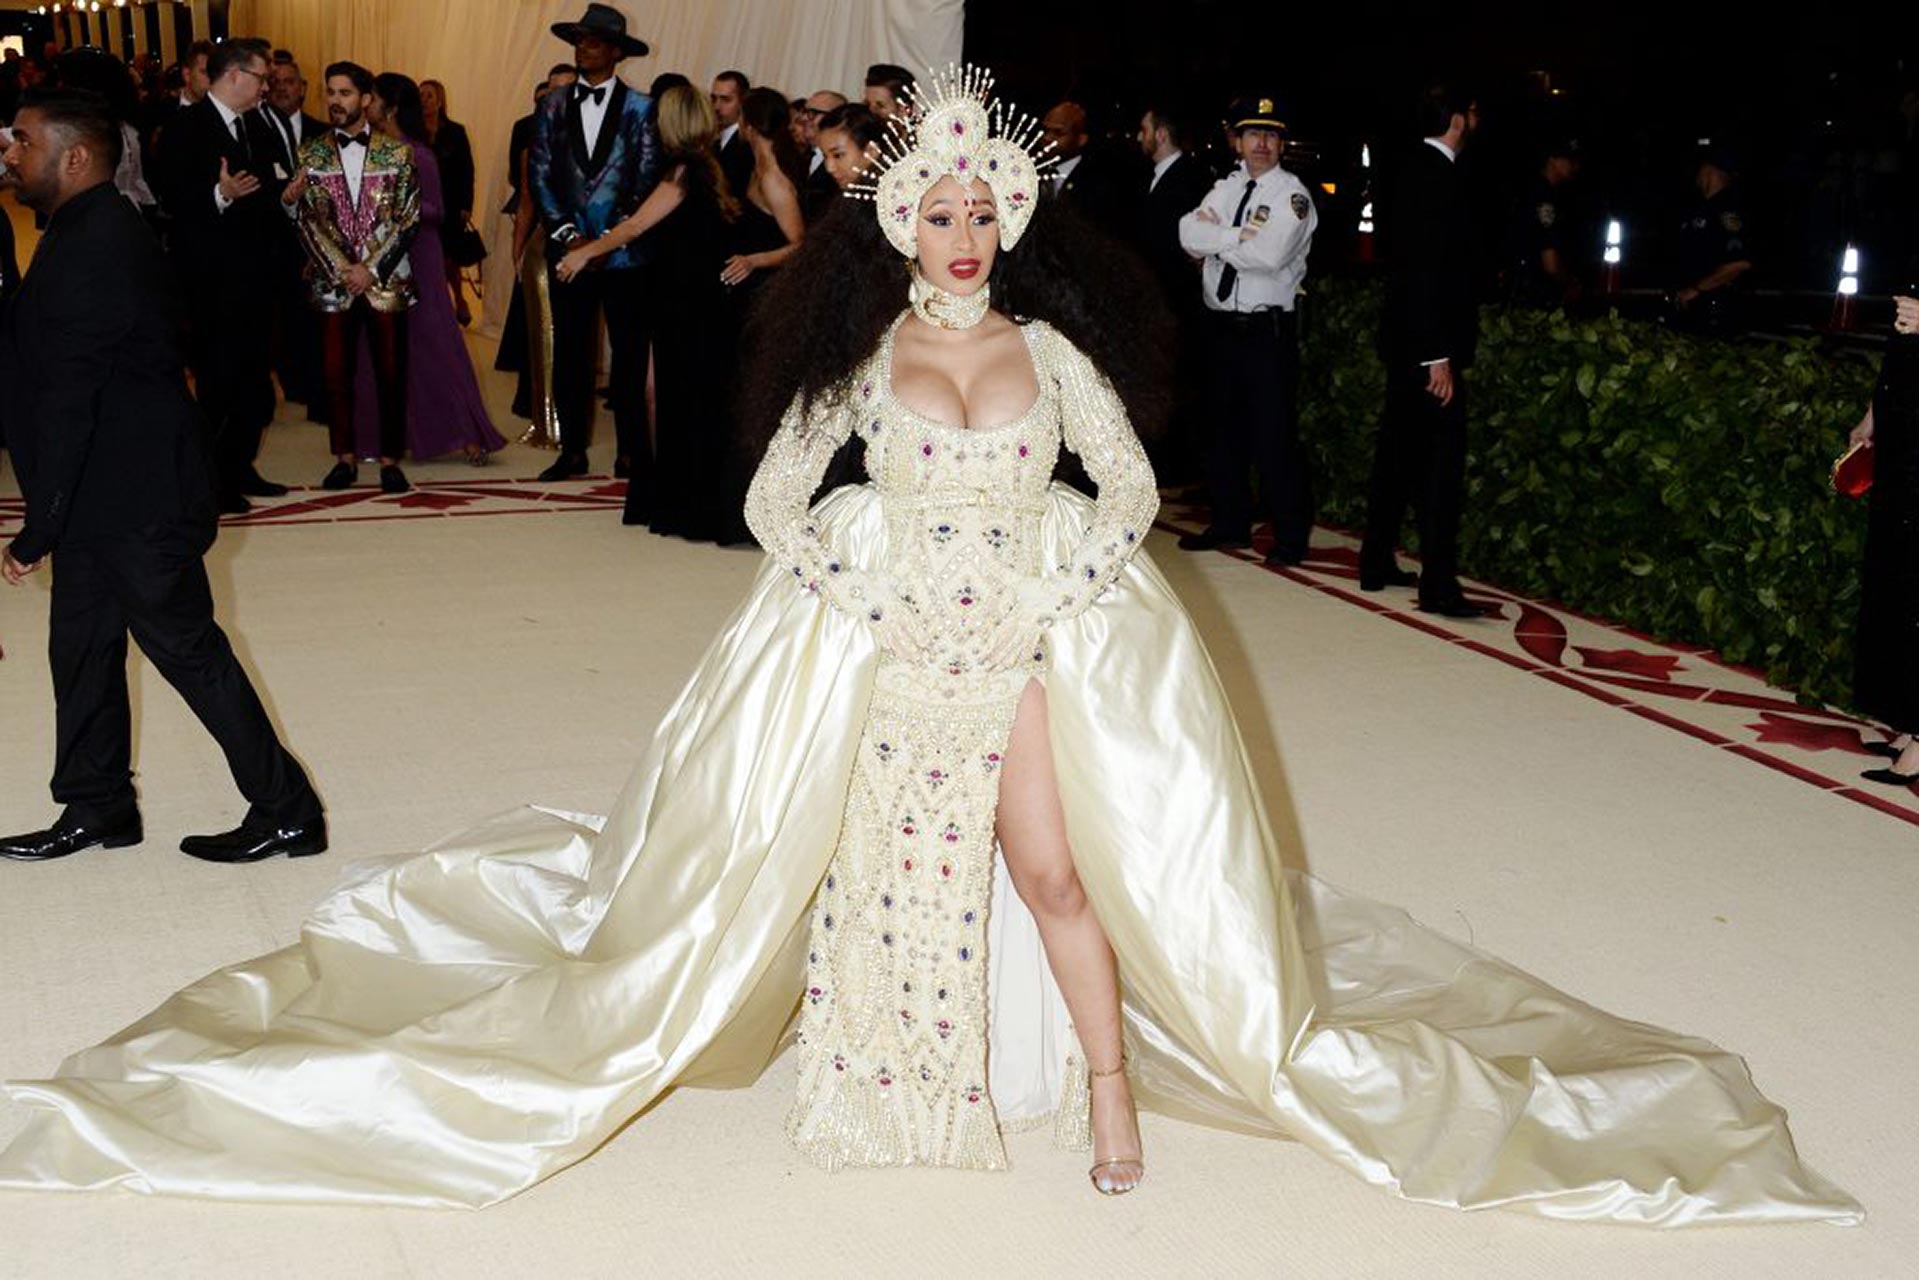 Cardi B Boobs Were Ready To Explode on MET Gala 2018 - Scandal Planet